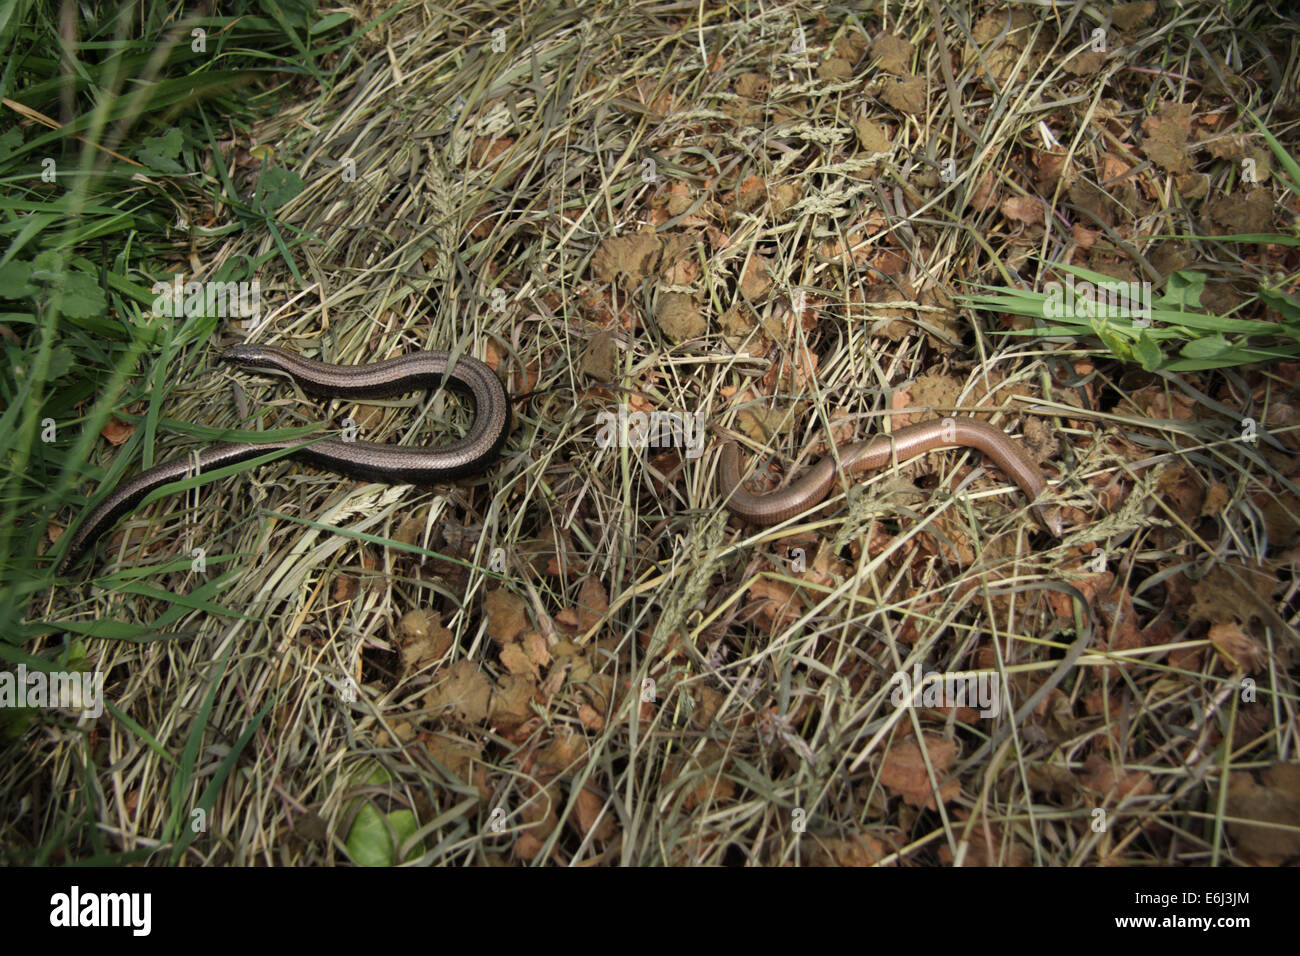 One male, one female, slow-worm Stock Photo